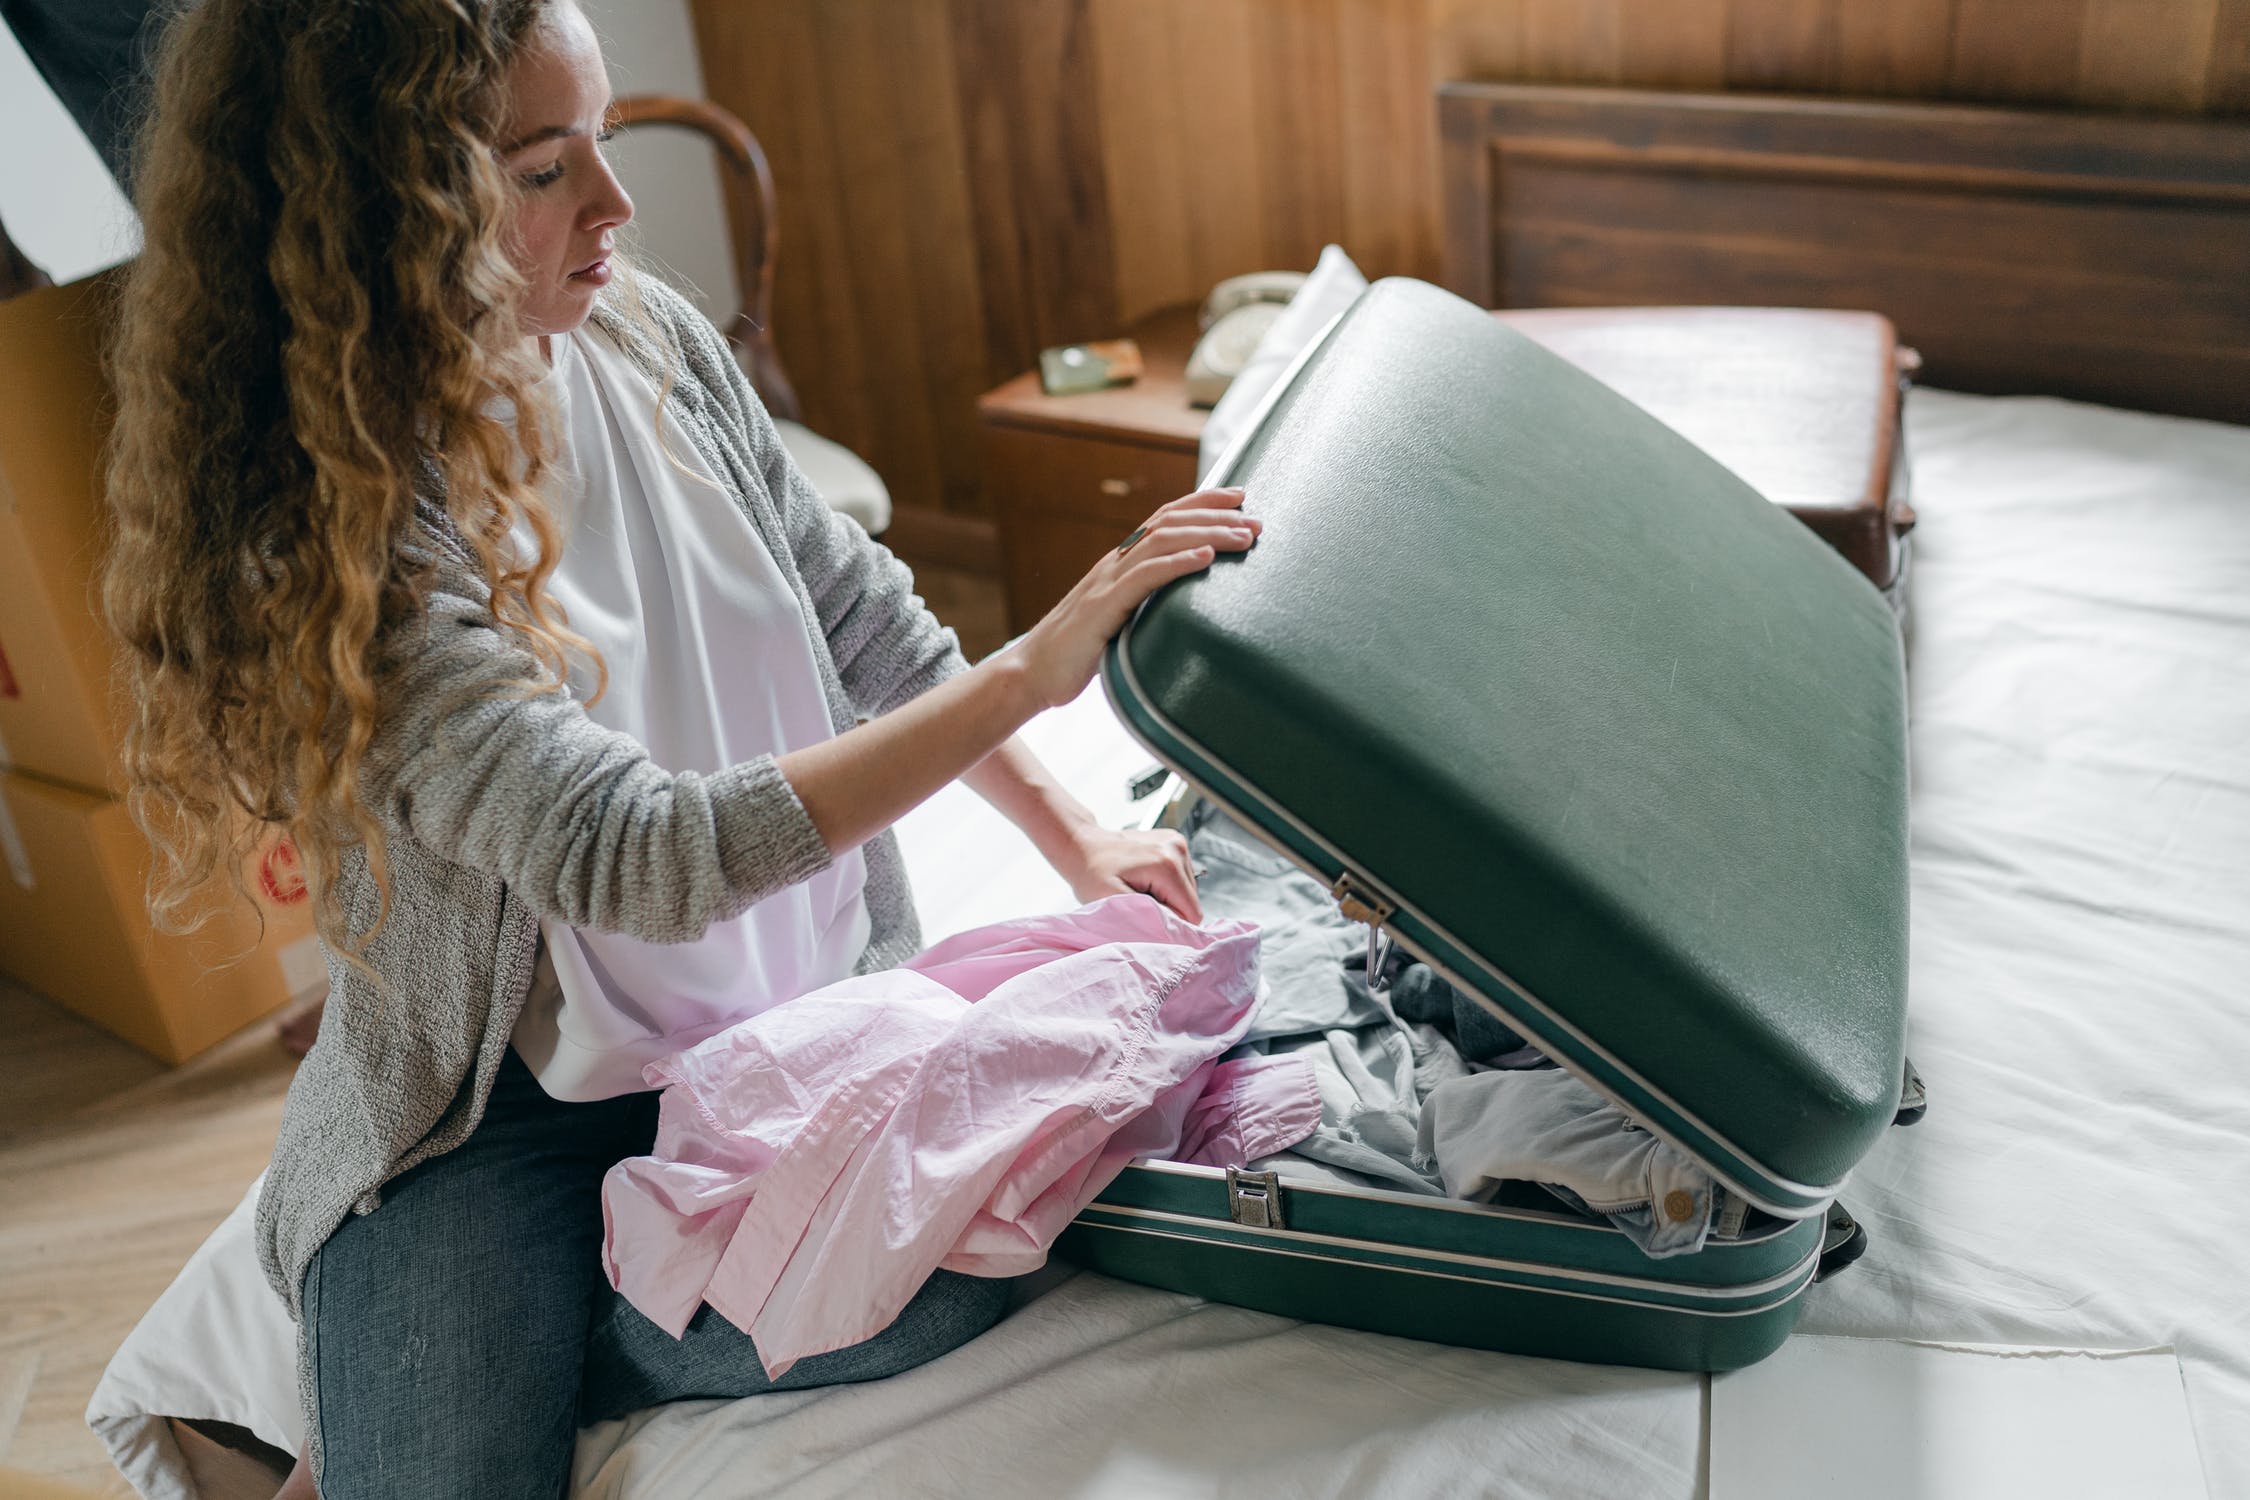 Alexa packed up and left a letter | Source: Pexels